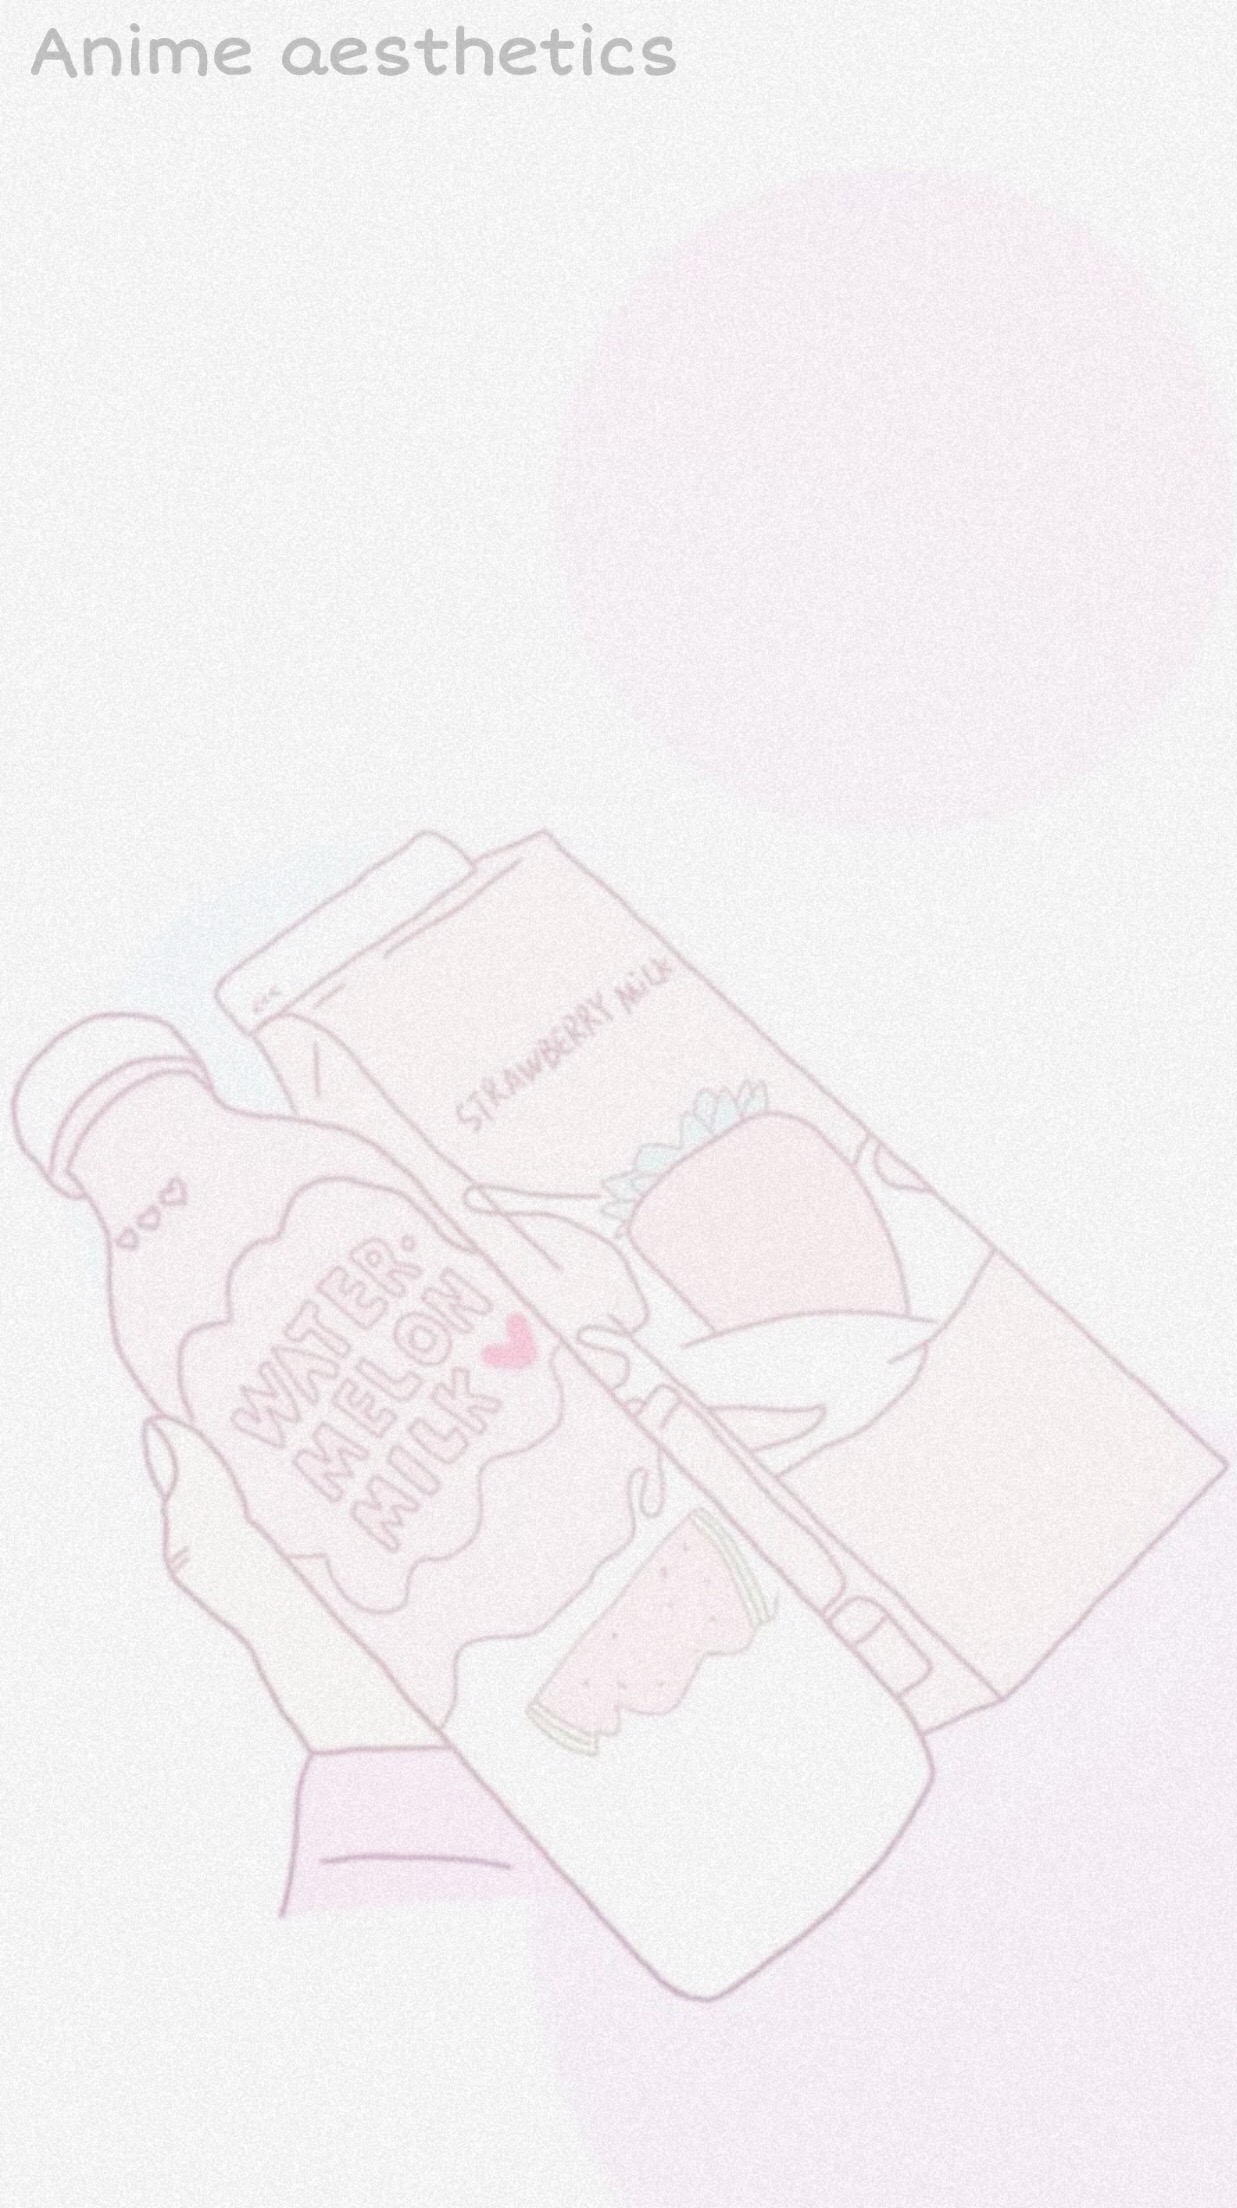 Strawberry Strawberrymilk Image By Just My Pictures Tons of awesome strawberry milk aesthetic wallpapers to download for free. strawberry strawberrymilk image by just